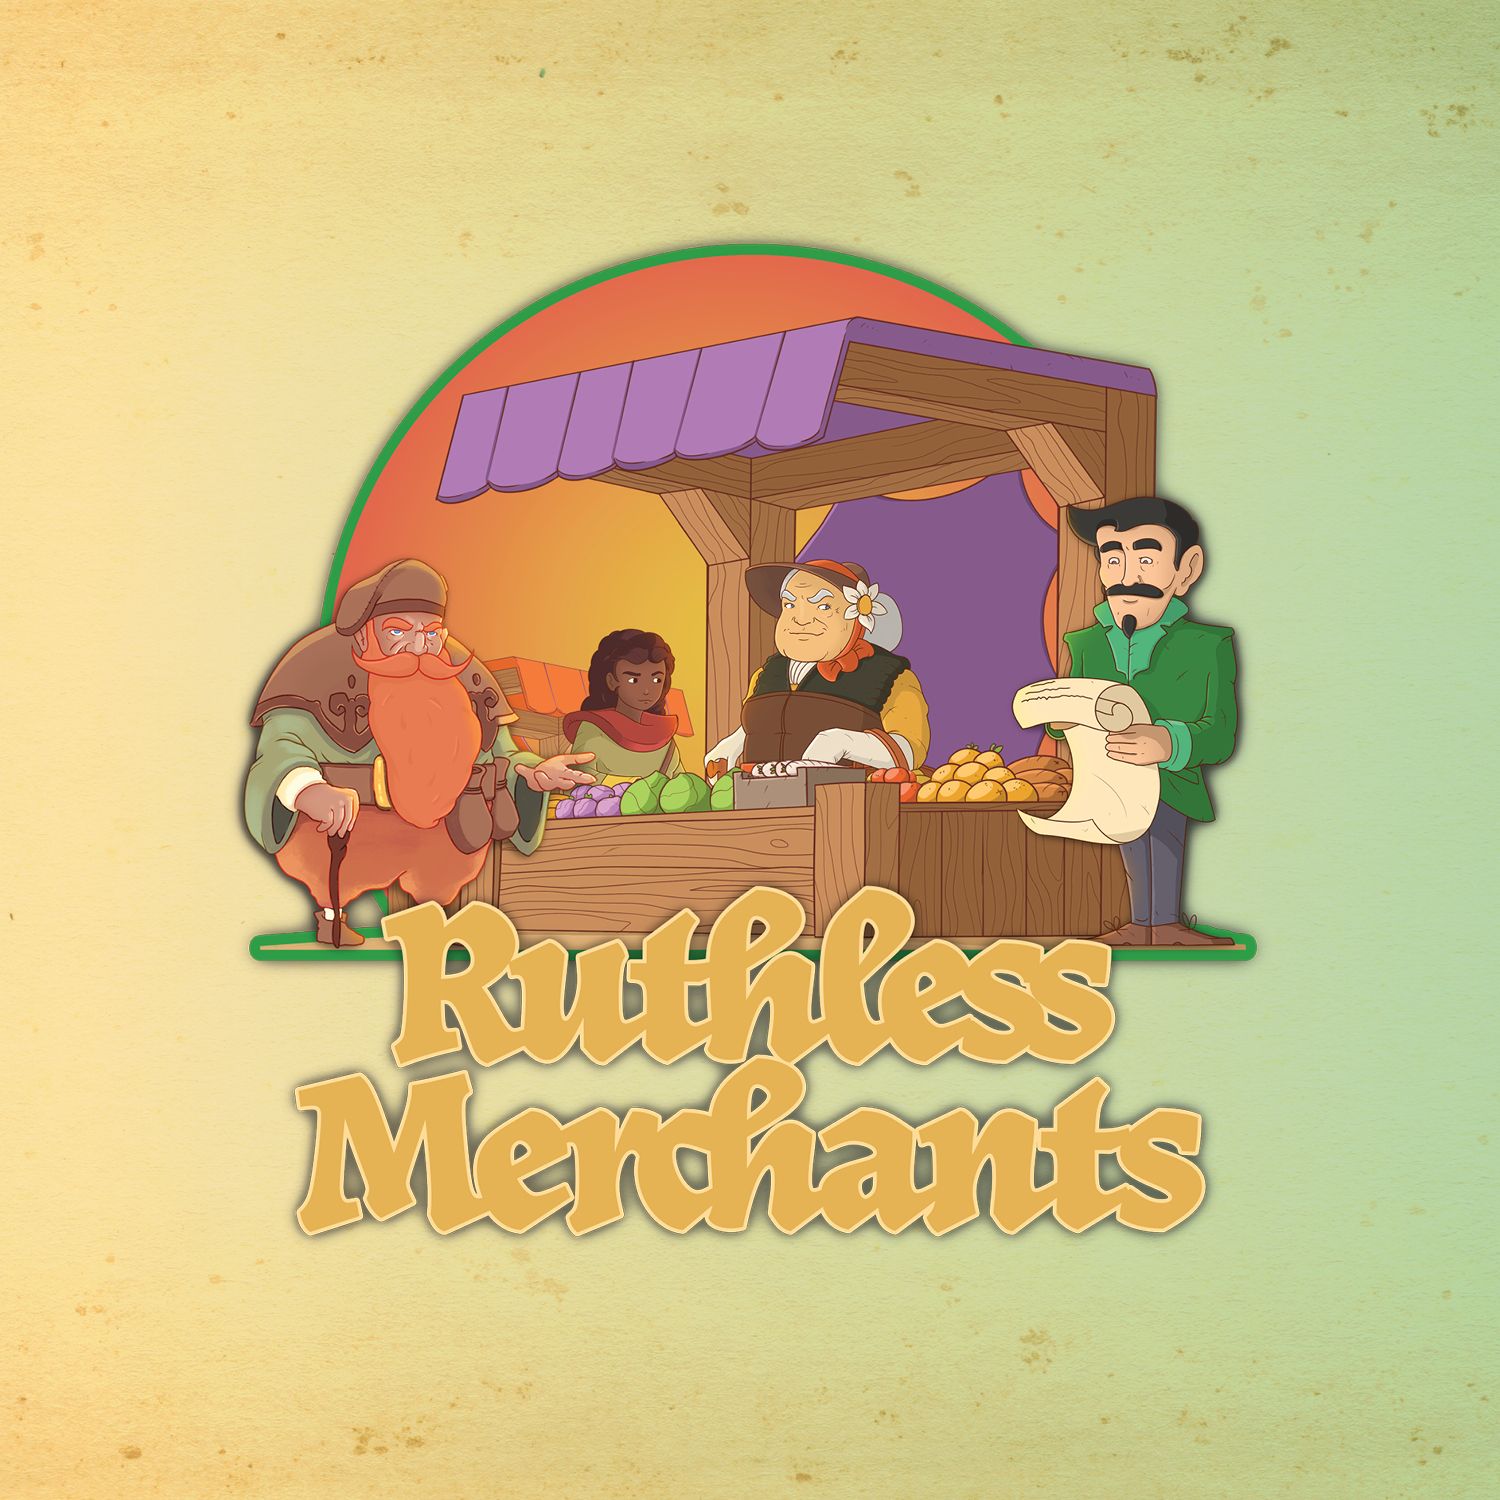 Ruthless Merchants - The rowdy marketplace full of ruthless encounters